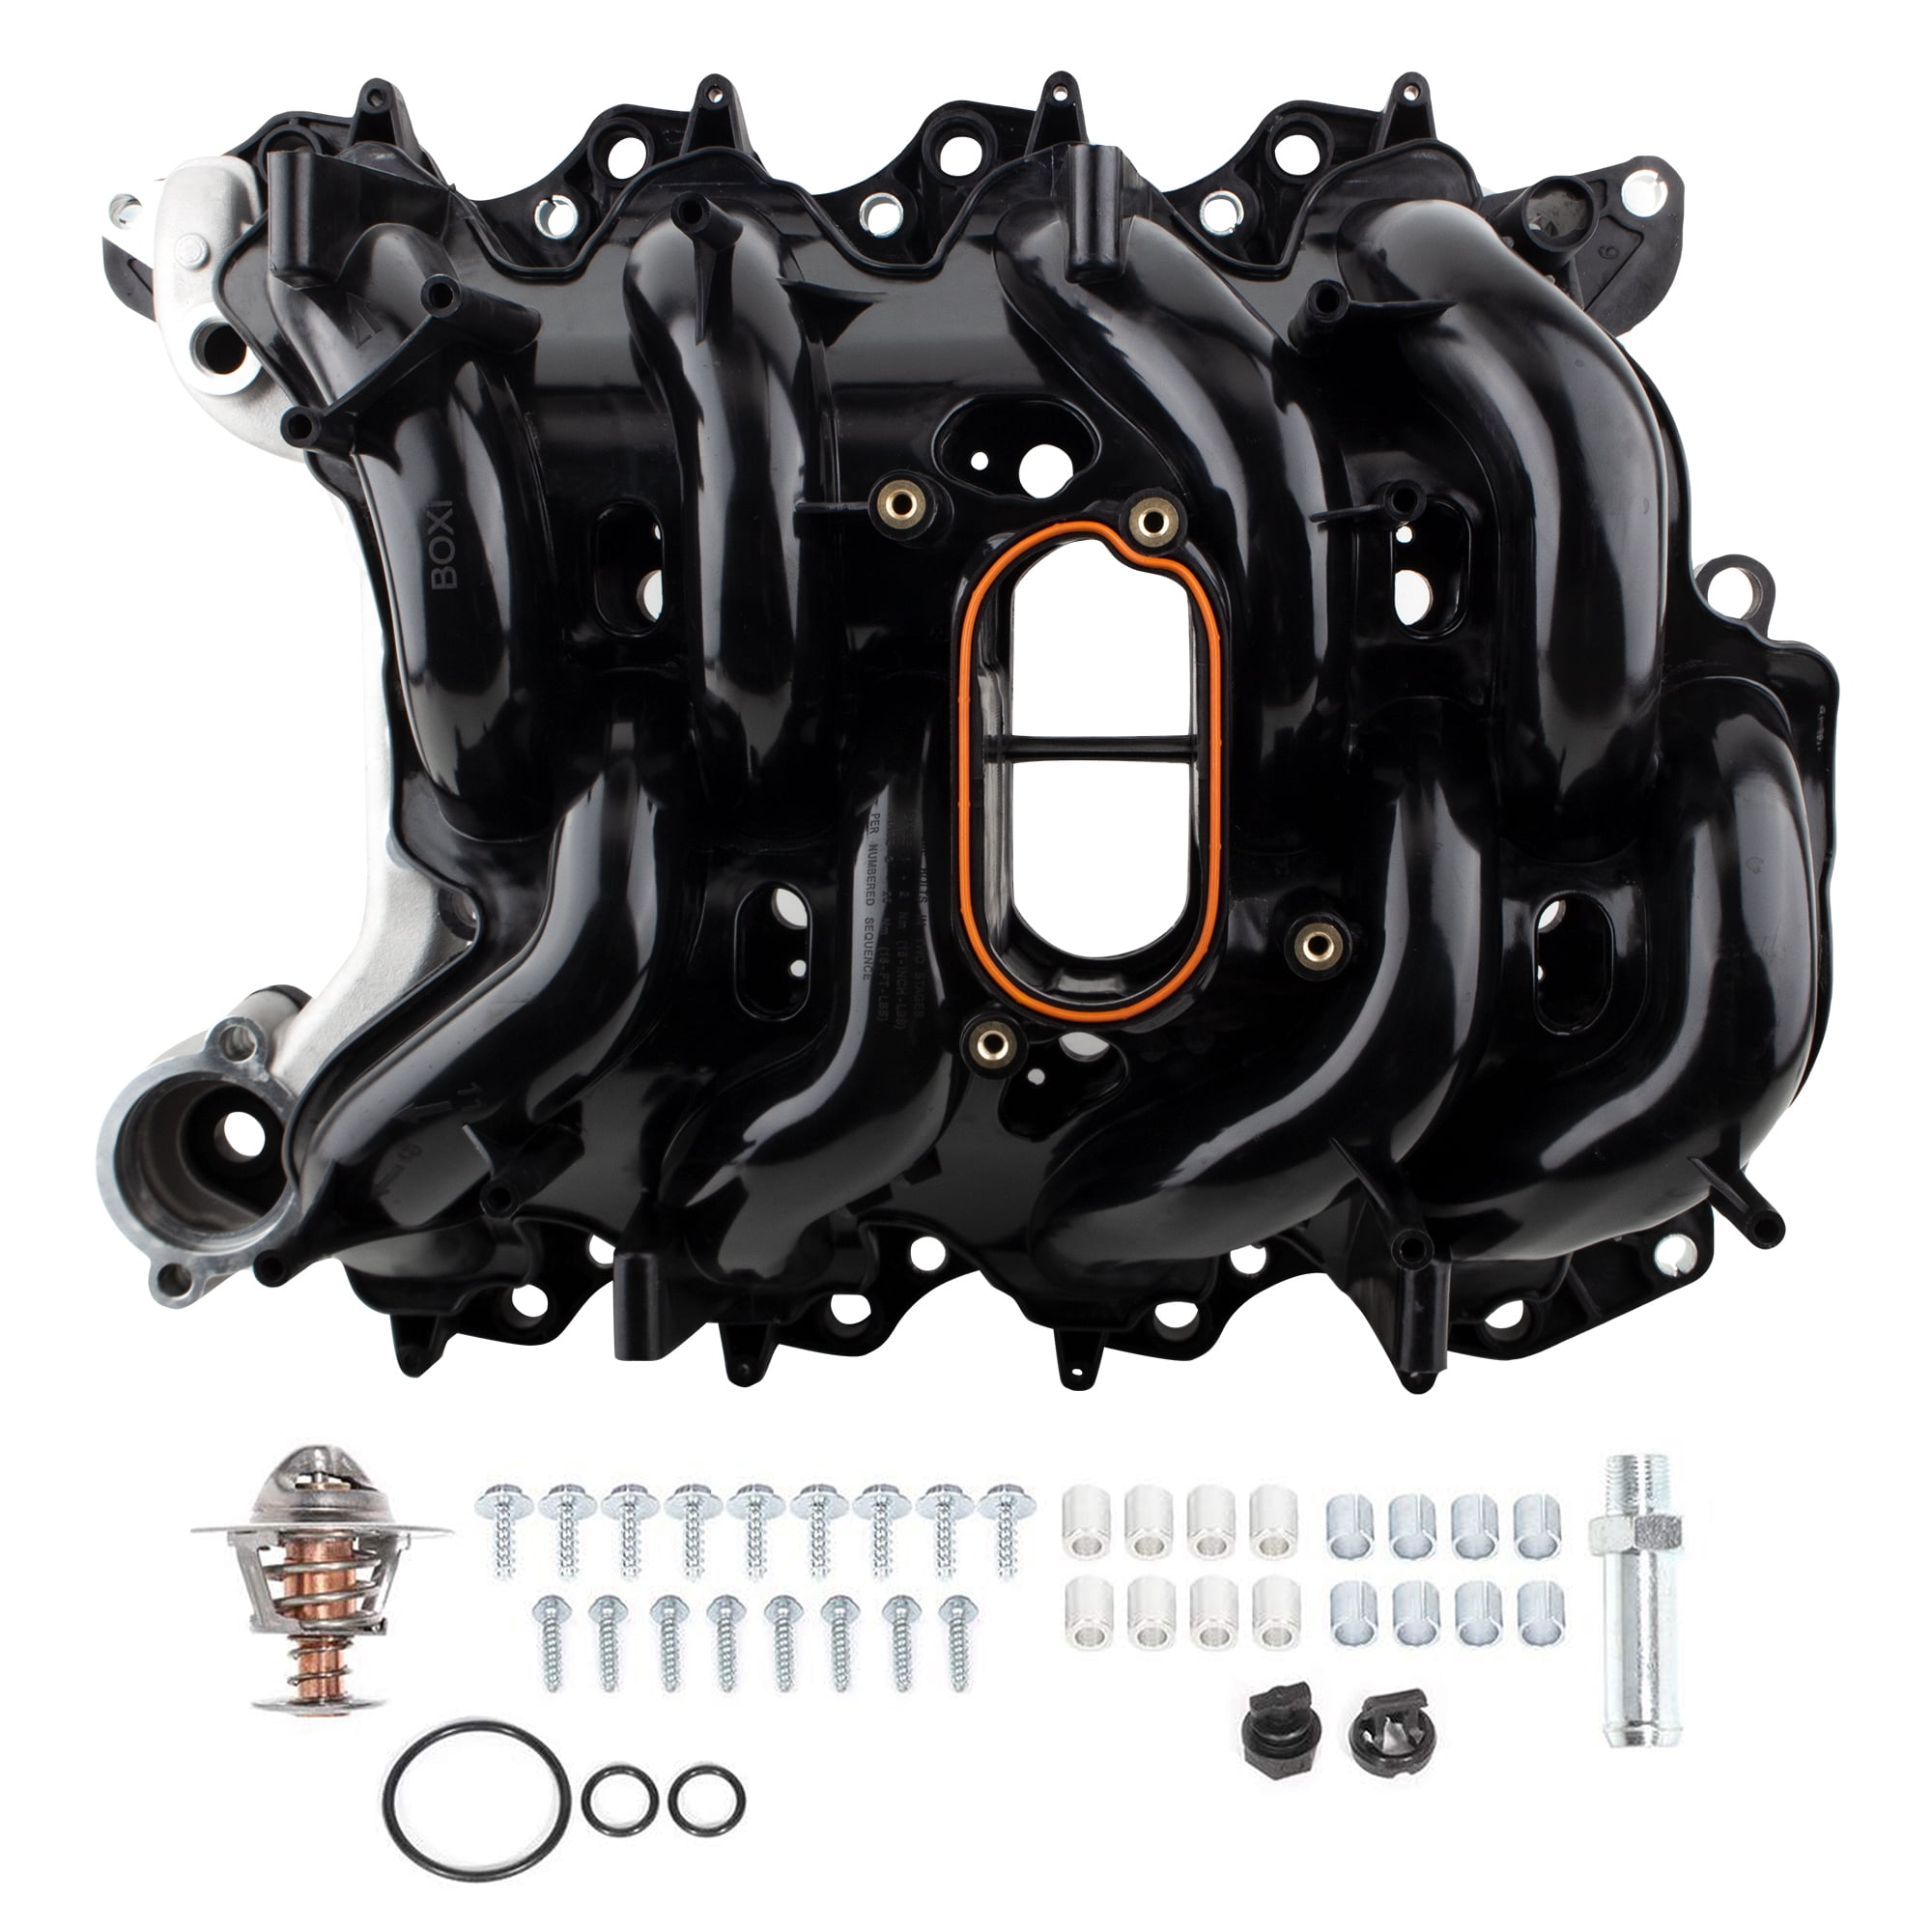 BOXI Upper Intake Manifold For 03-06 Ford E-150 E-250/97-02 Ford E-150 Econoline/ 97-04 Ford Expedition/ 97-06 Ford F-150/97-99 Ford F-250/4.6L V8 ONLY 615-278 1L3Z9424BA 